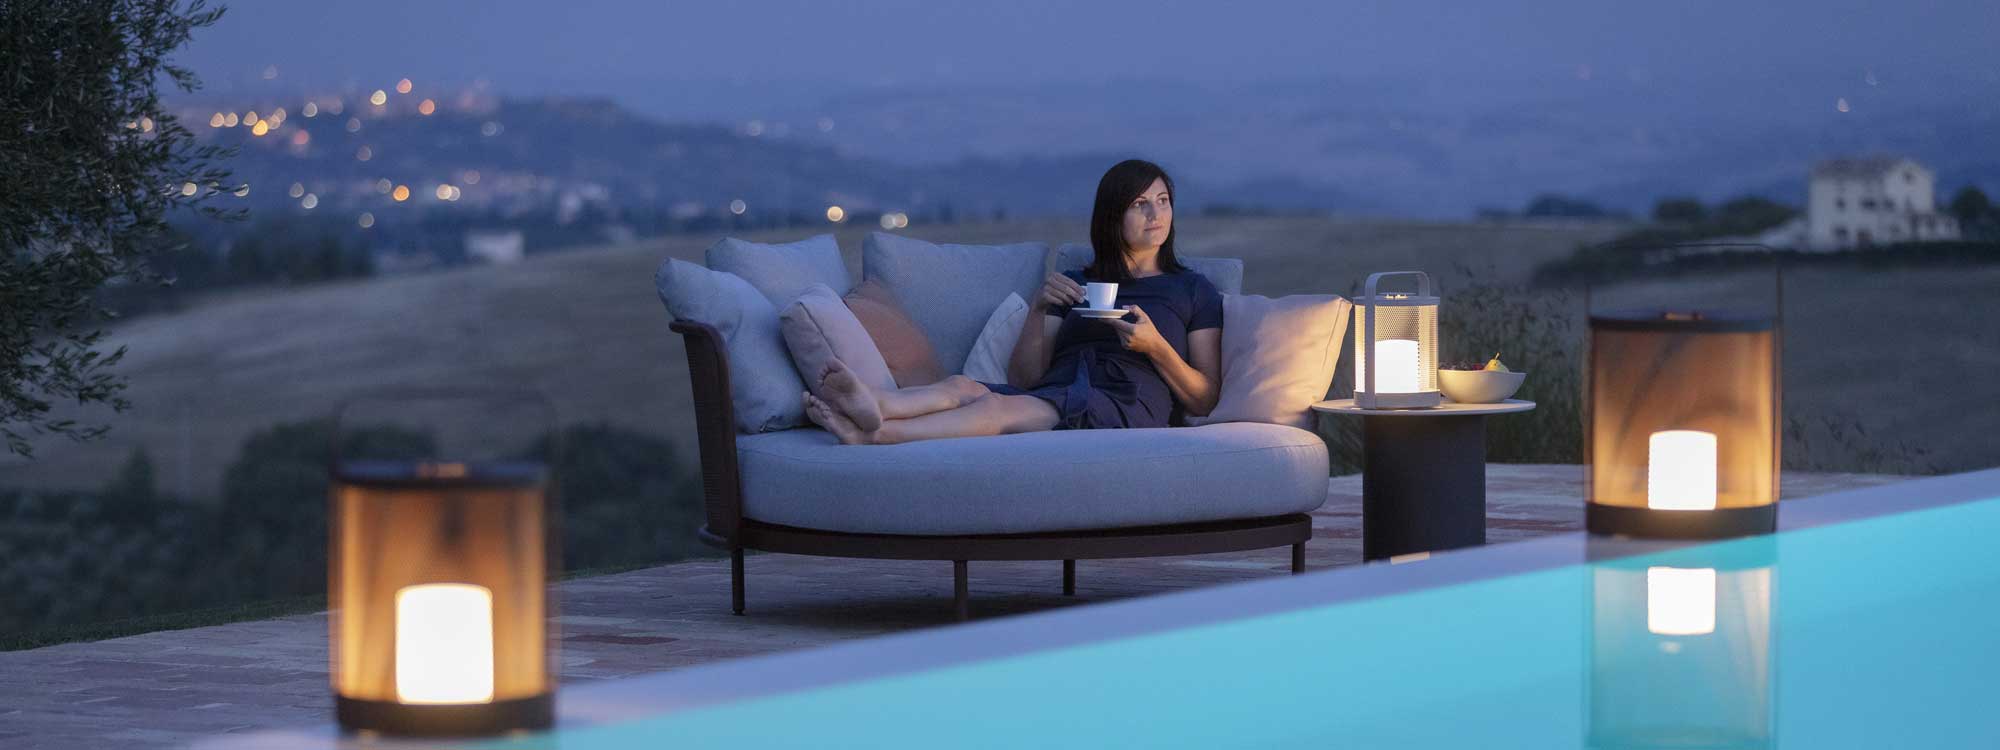 Dusk shot of woman relaxing in Baza modern garden day bed next to swimming pool, with lights of town twinkling in distance